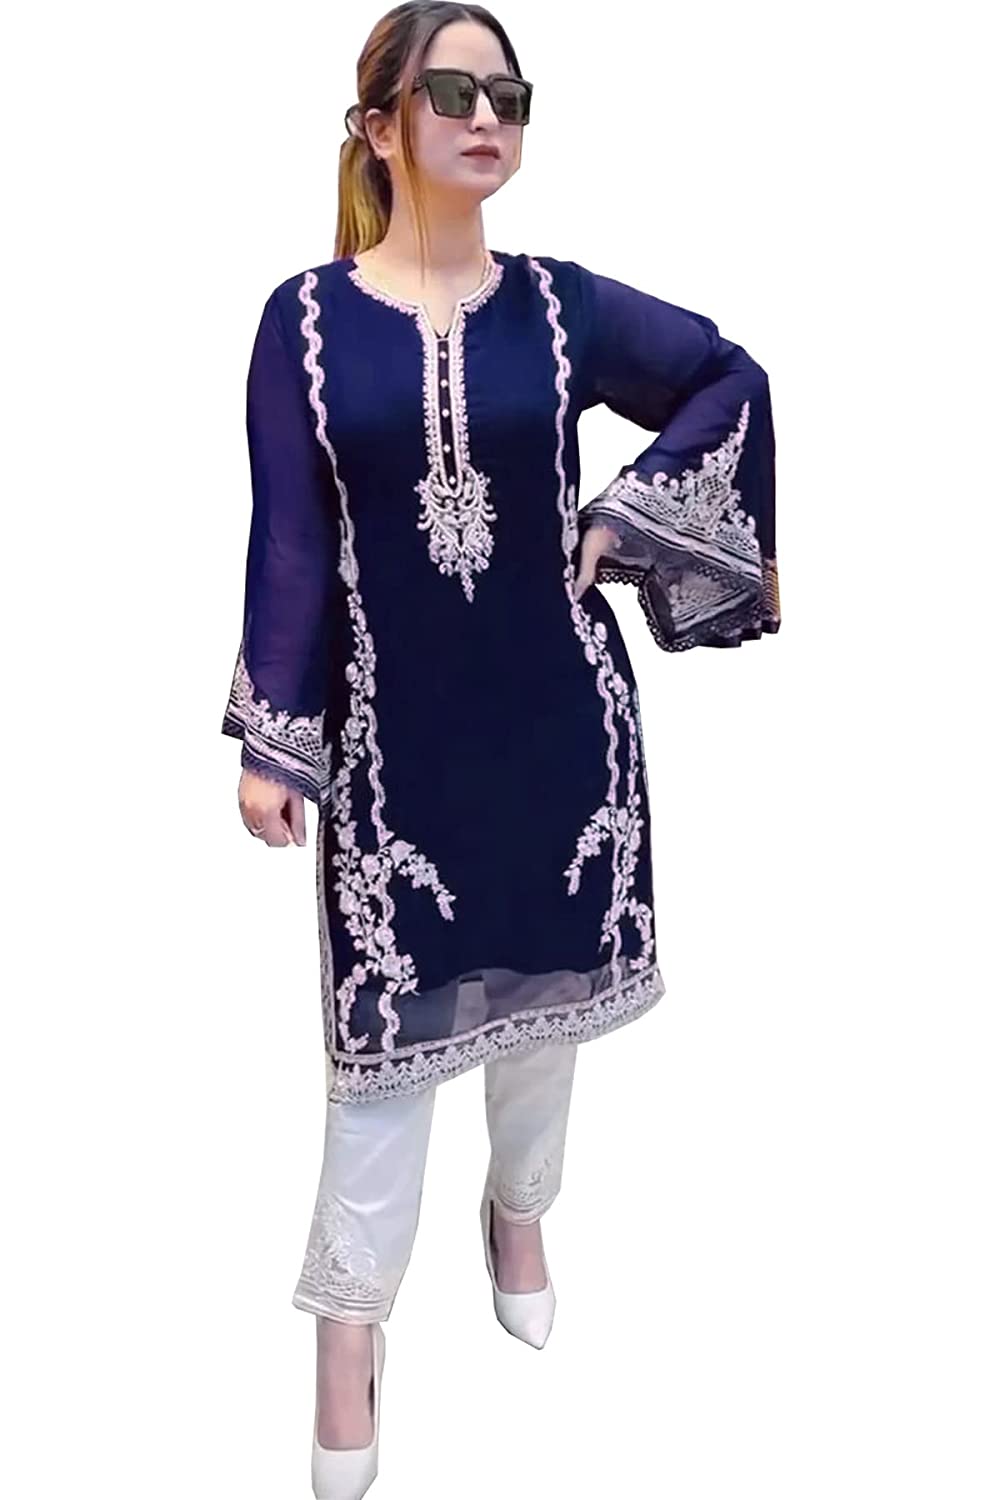 Bollyclues Women's Georgette Salwar Suit Set -  Salwar Suits in Sri Lanka from Arcade Online Shopping - Just Rs. 6699!